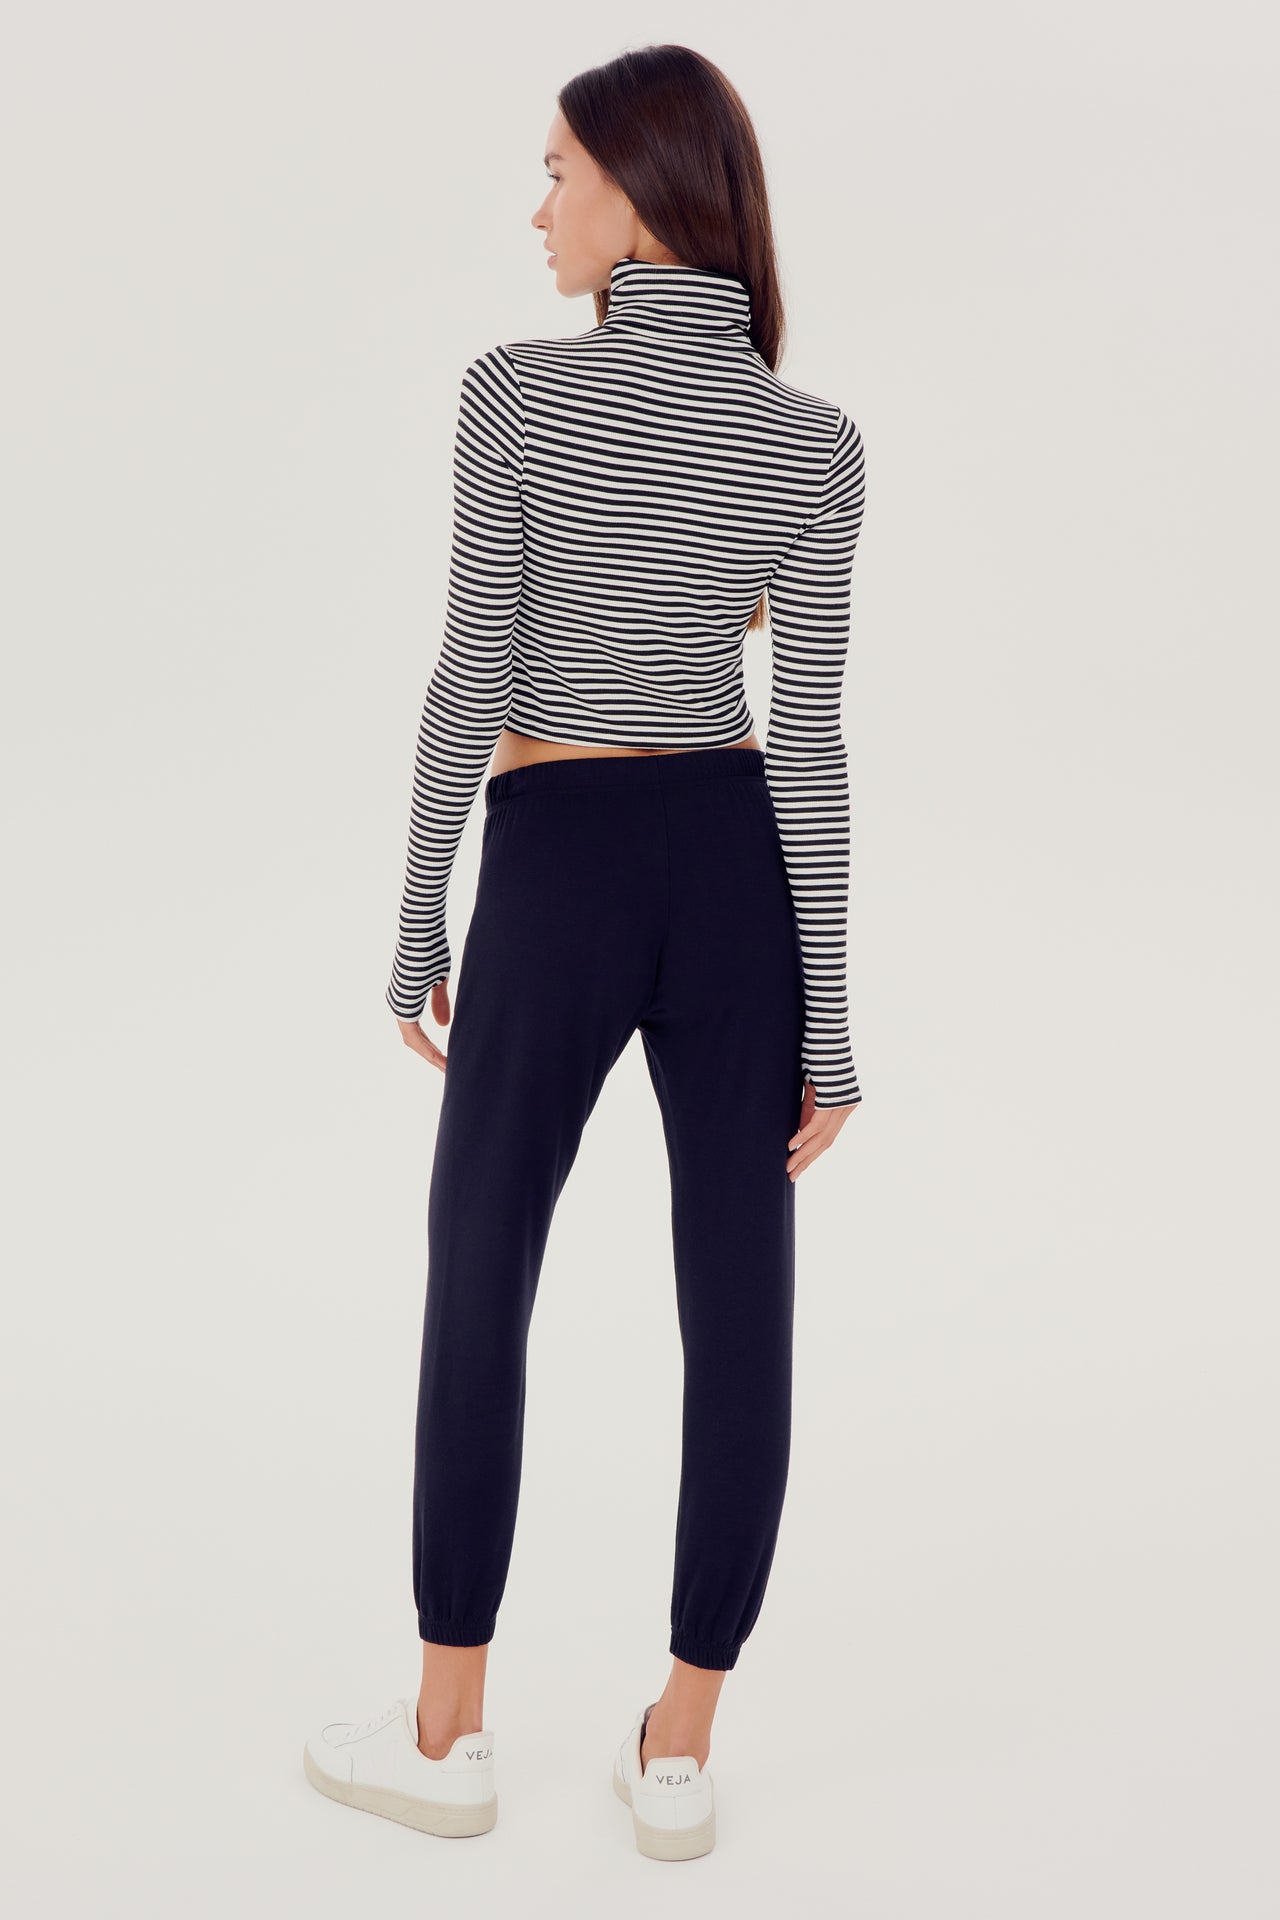 The back view of a woman wearing a black SPLITS59 Jackson Rib Cropped Turtleneck sweater and high waist leggings.